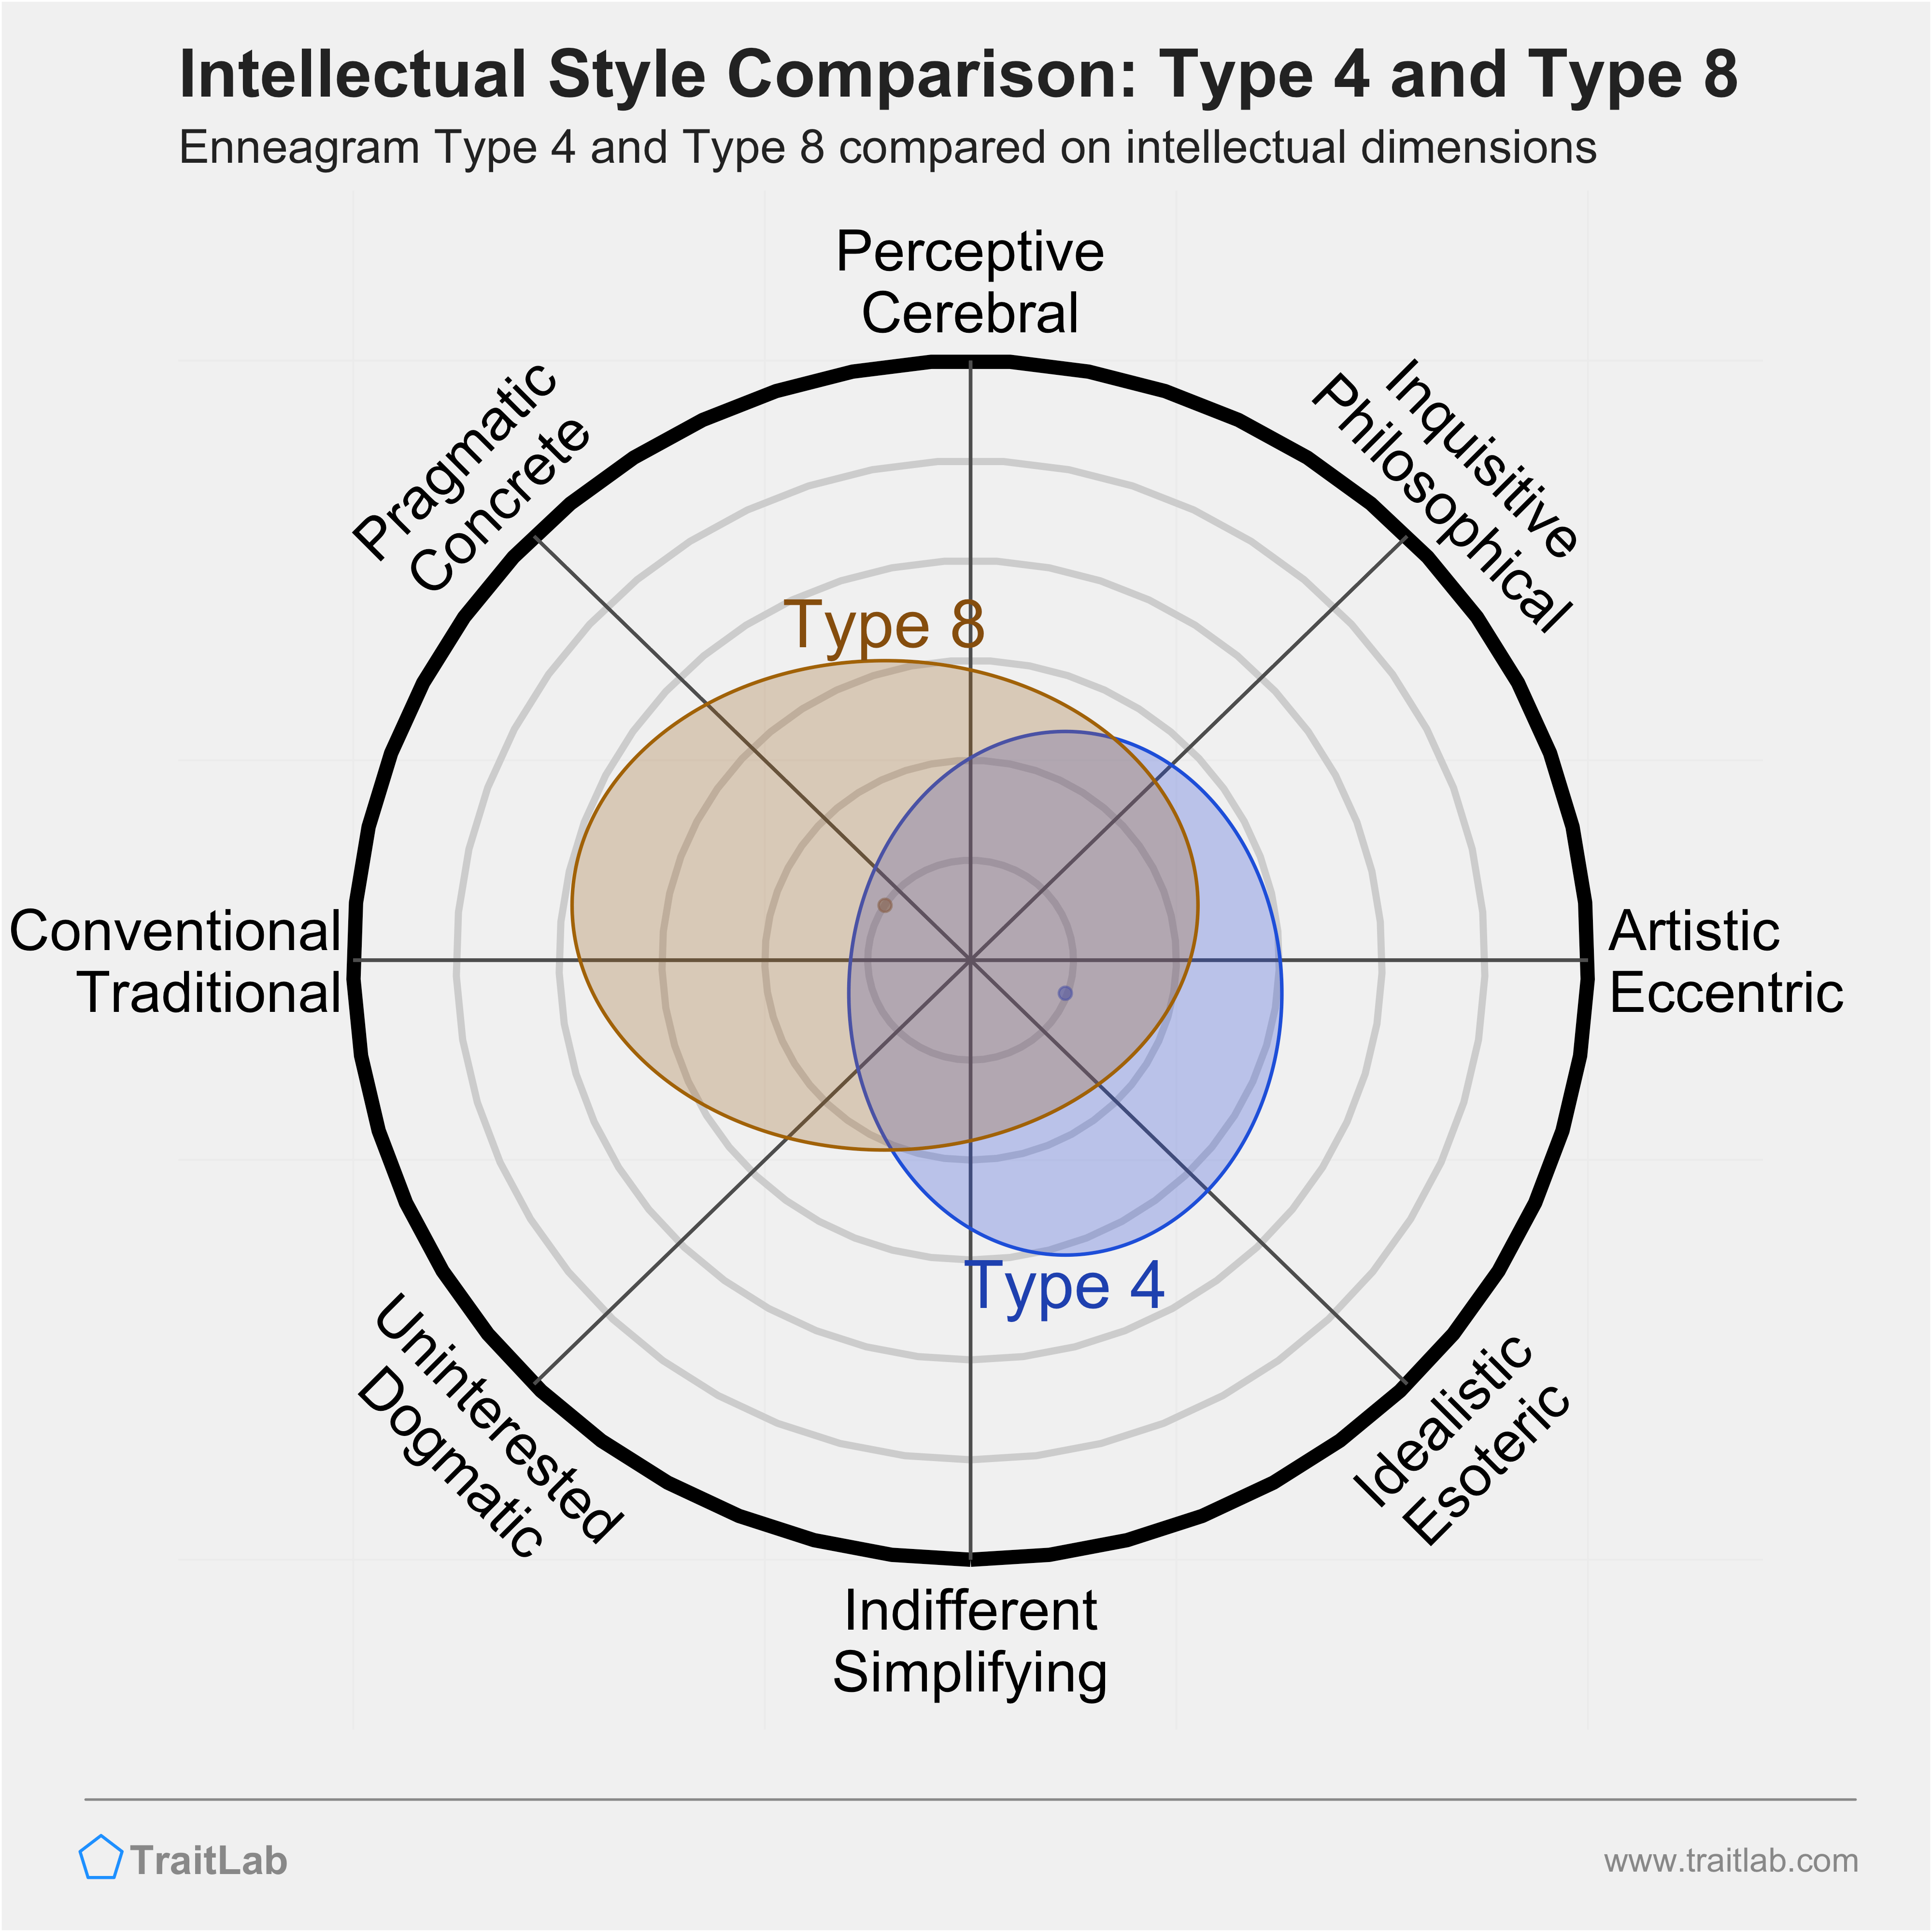 Type 4 and Type 8 comparison across intellectual dimensions